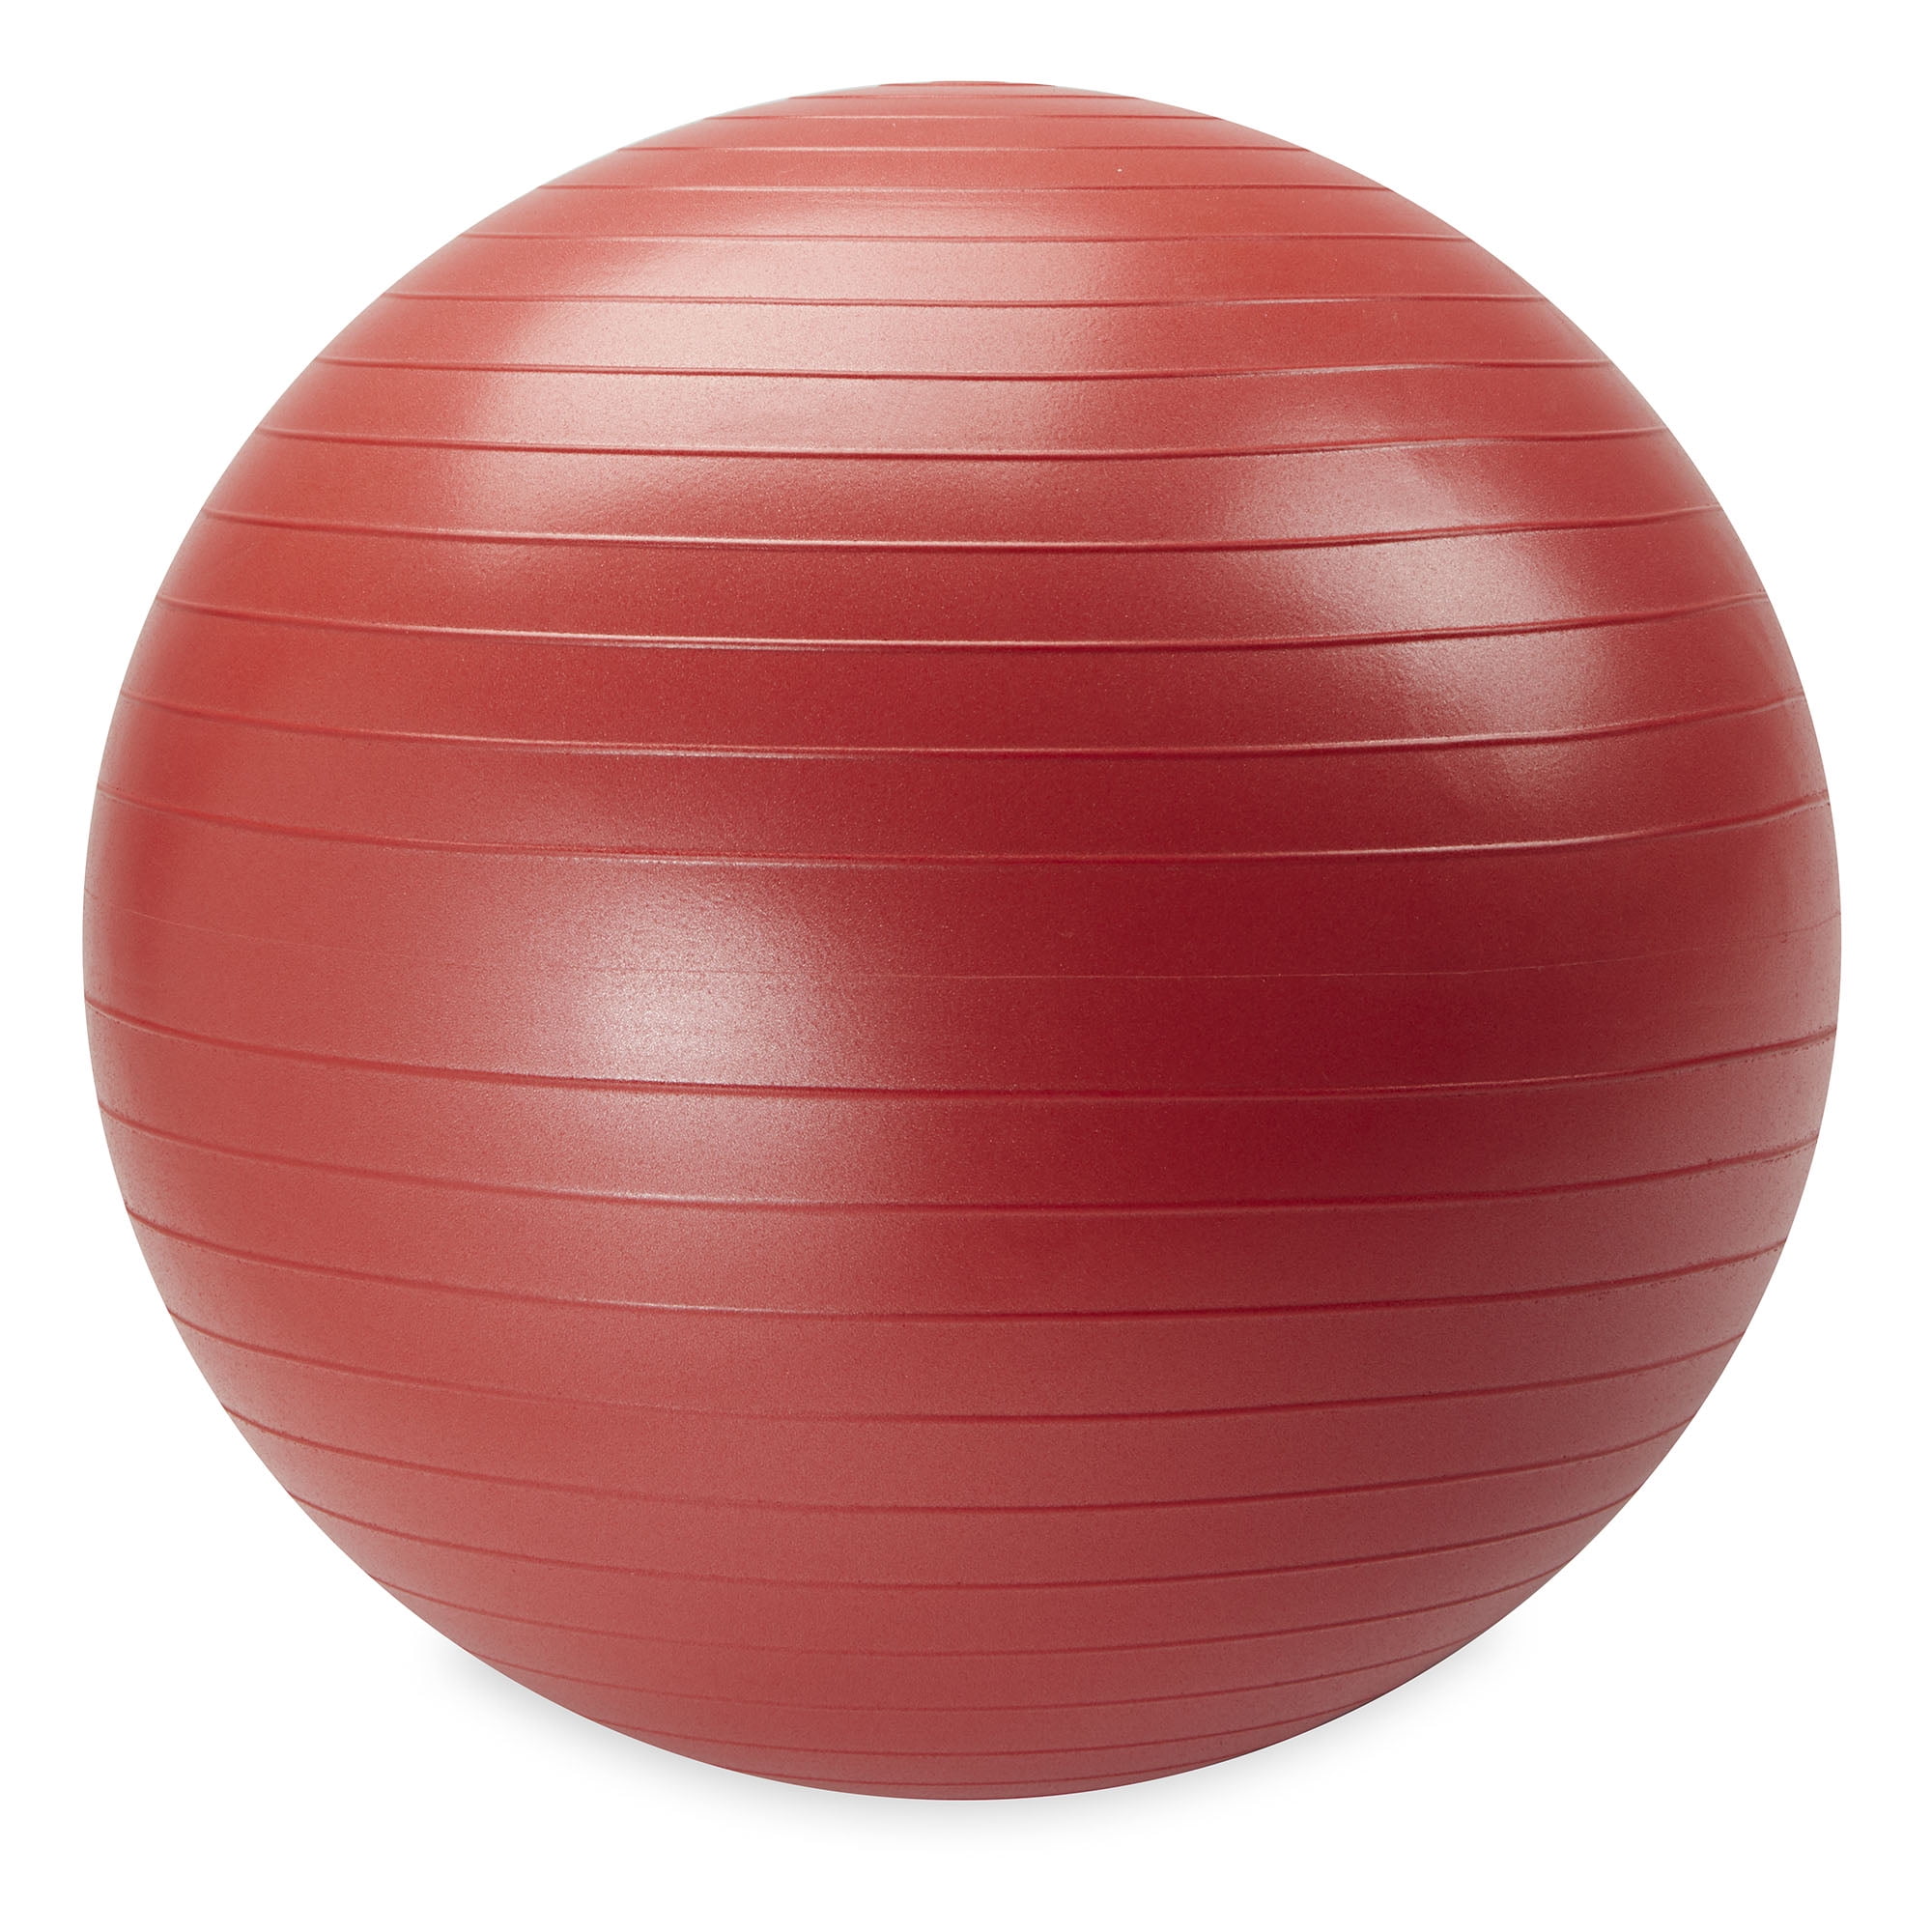 90+ Physical Therapy Balance Ball Stock Illustrations, Royalty